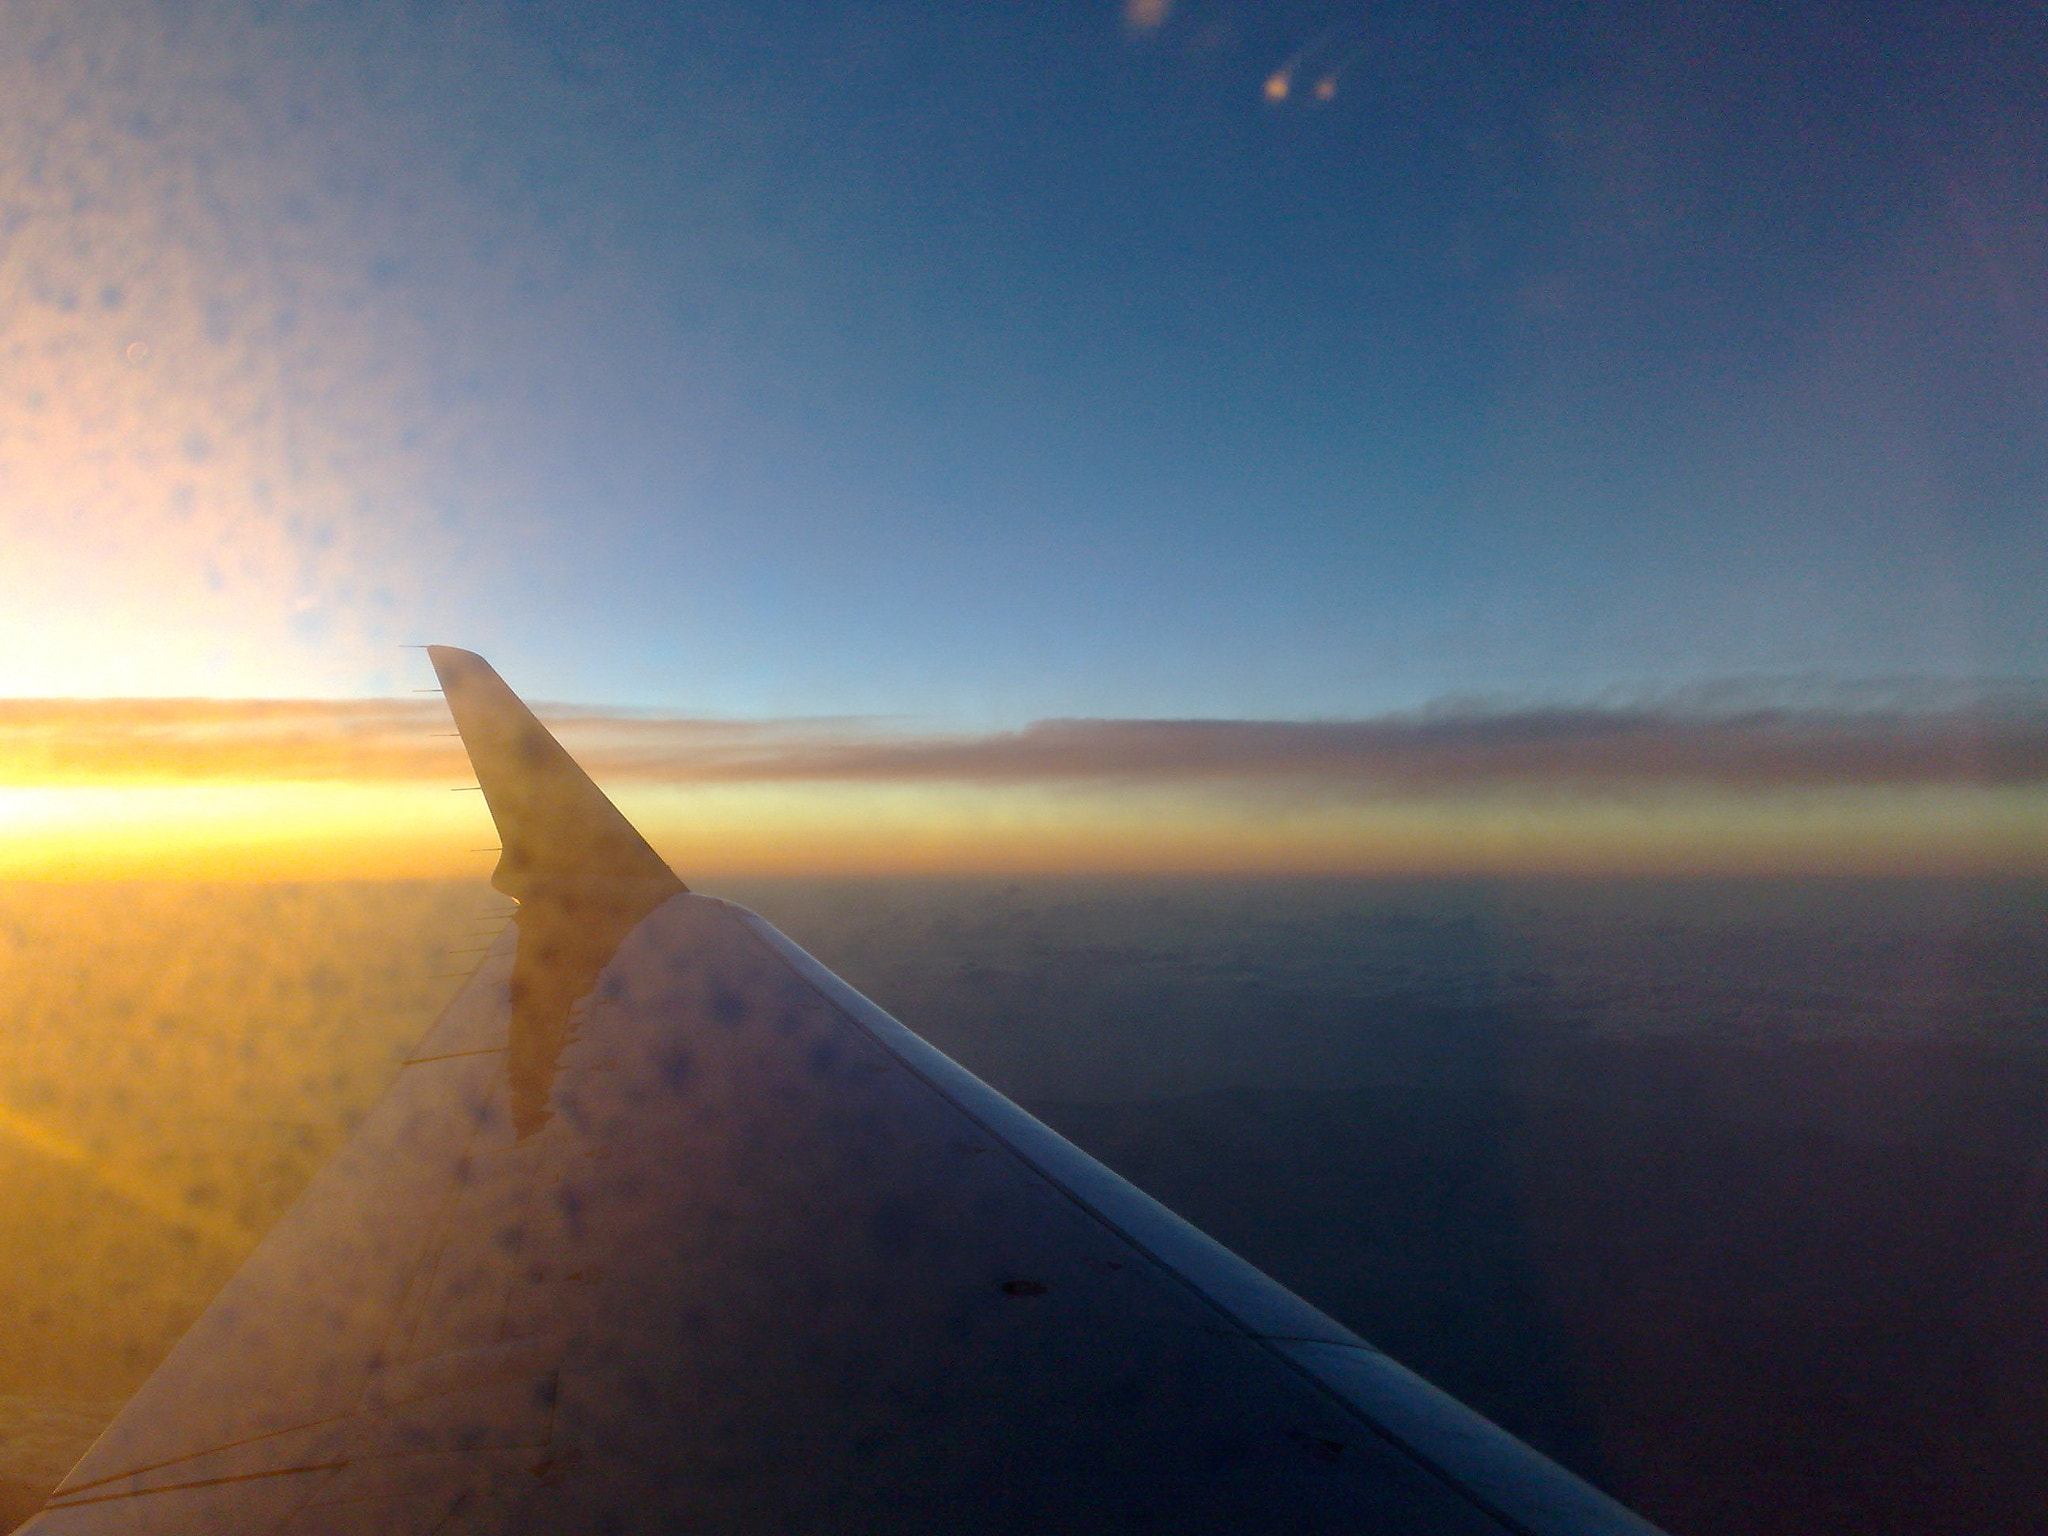 Nokia N95 8GB sample photo. Sunset behind airplane wing photography